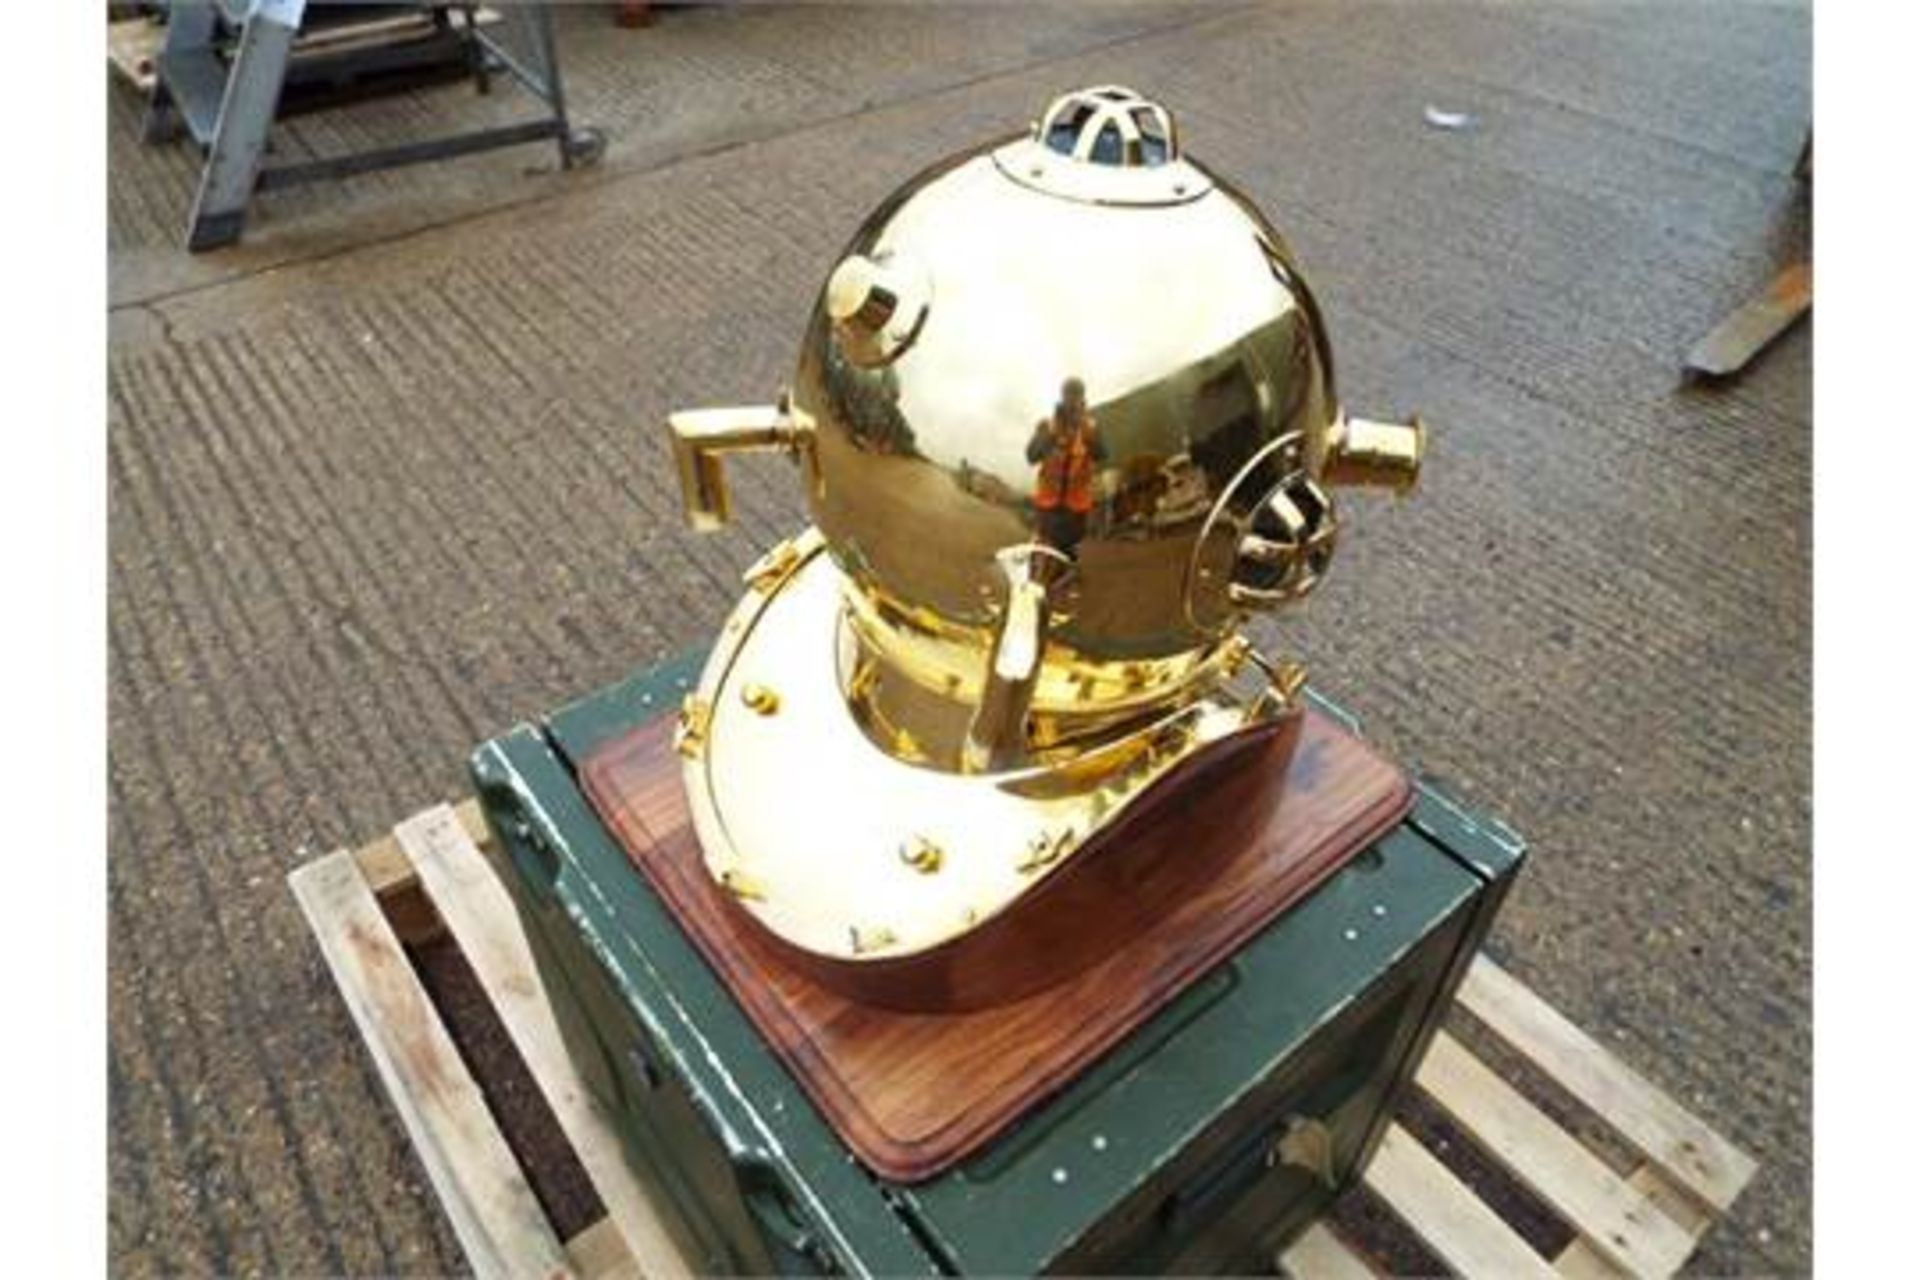 Replica Full Size U.S. Navy Mark V Brass Diving Helmet on Wooden Display Stand - Image 4 of 5